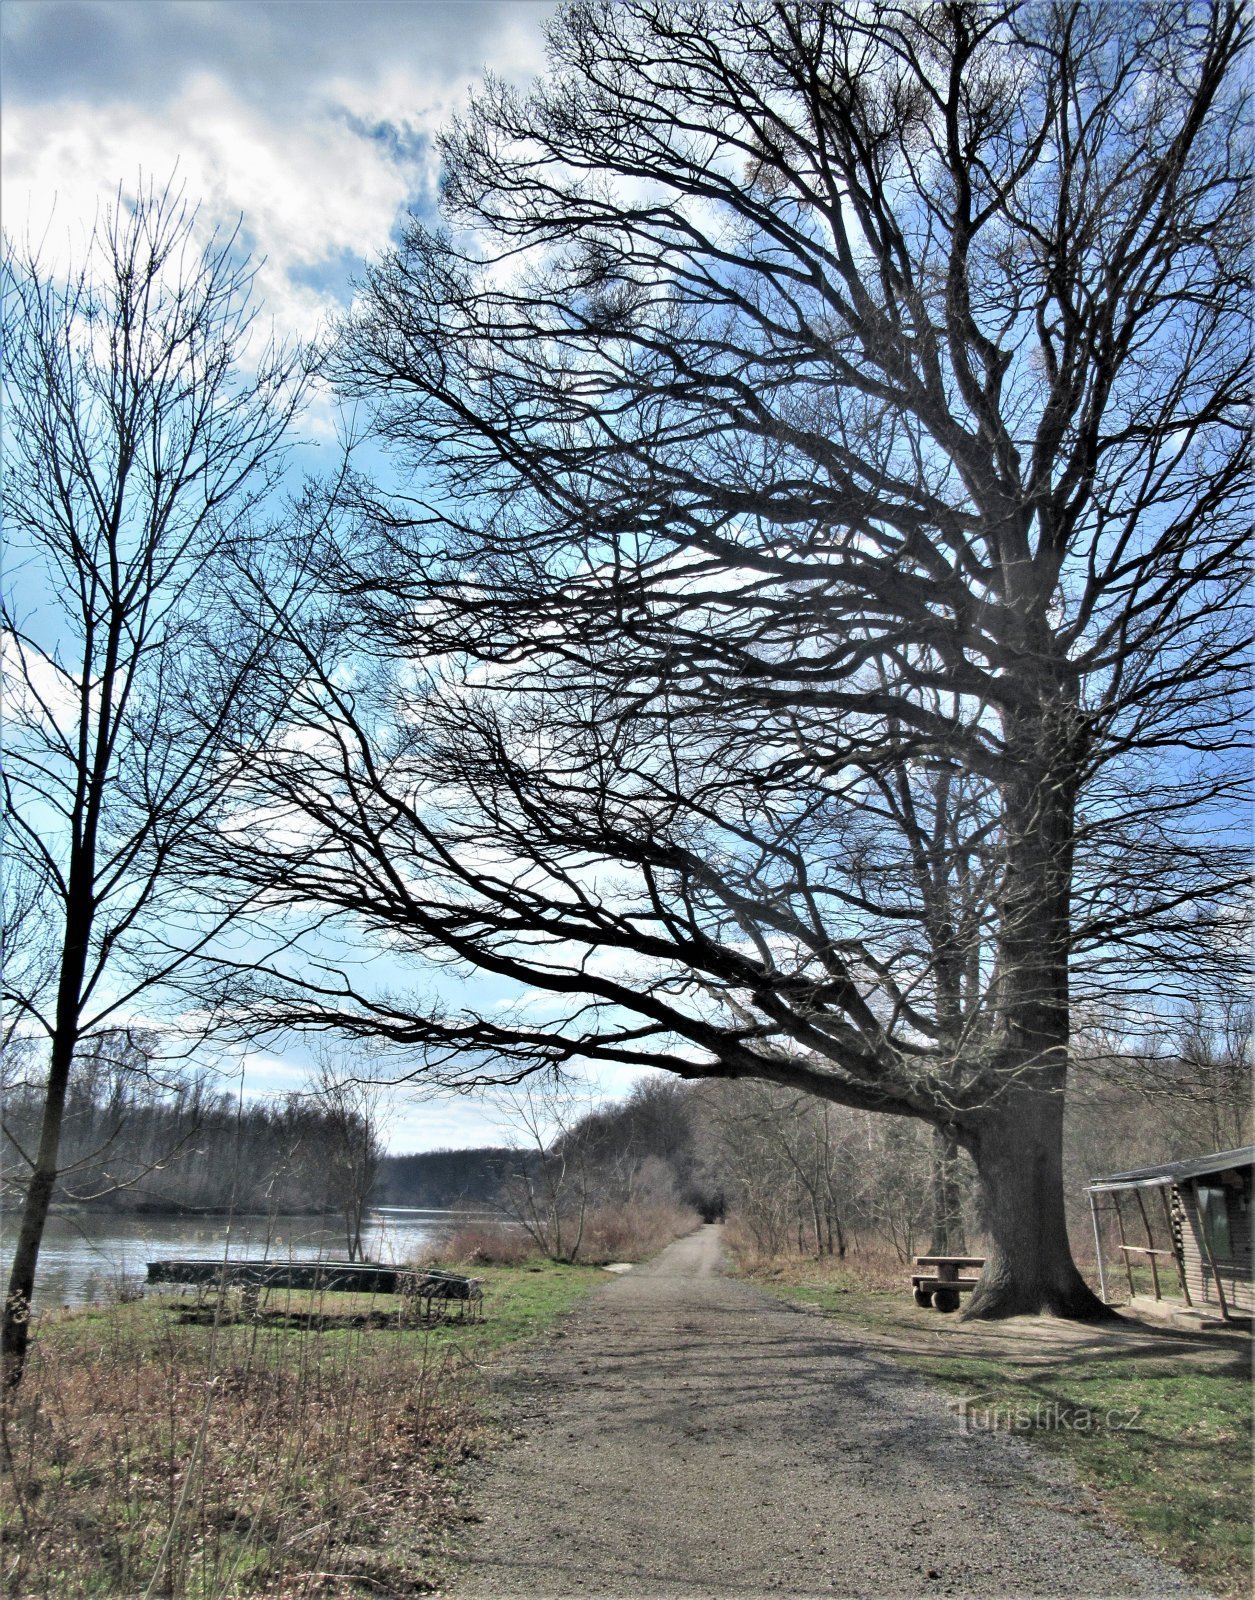 The oak tree is located by the paved access road and by the bank of the Morava River